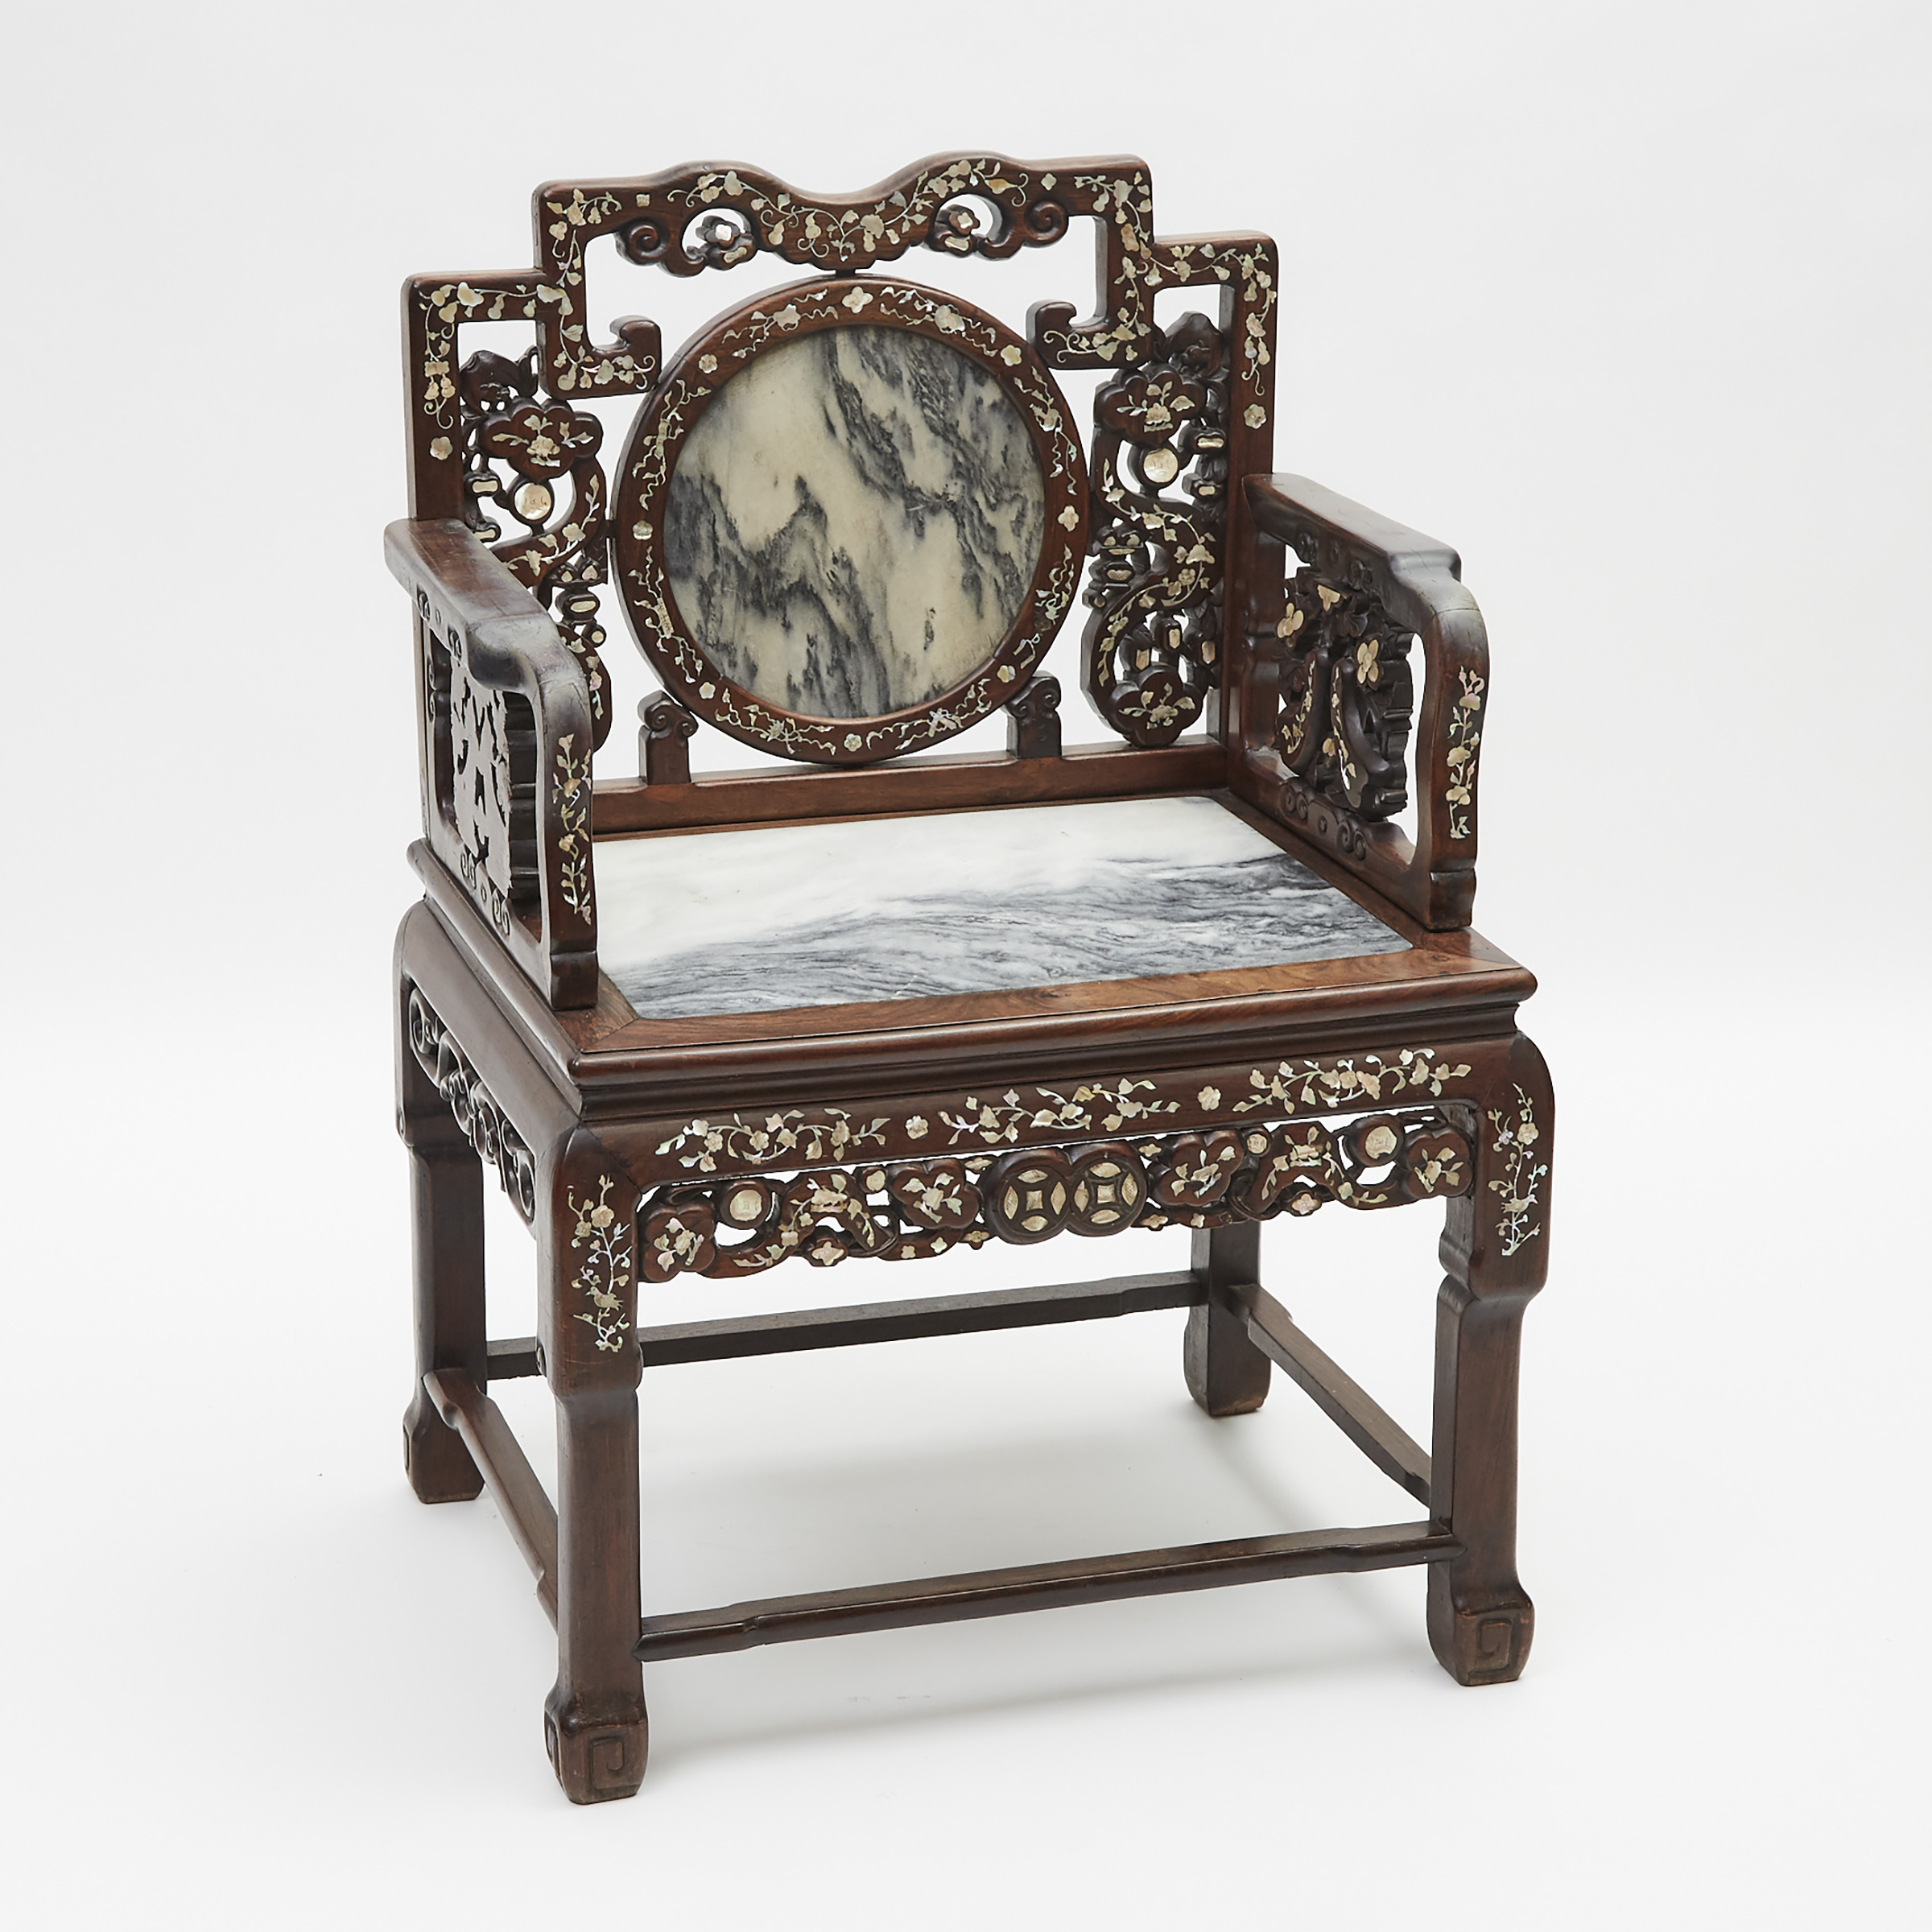 A Rosewood Mother-of-Pearl and Marble Inlaid Chair, Early 20th Century